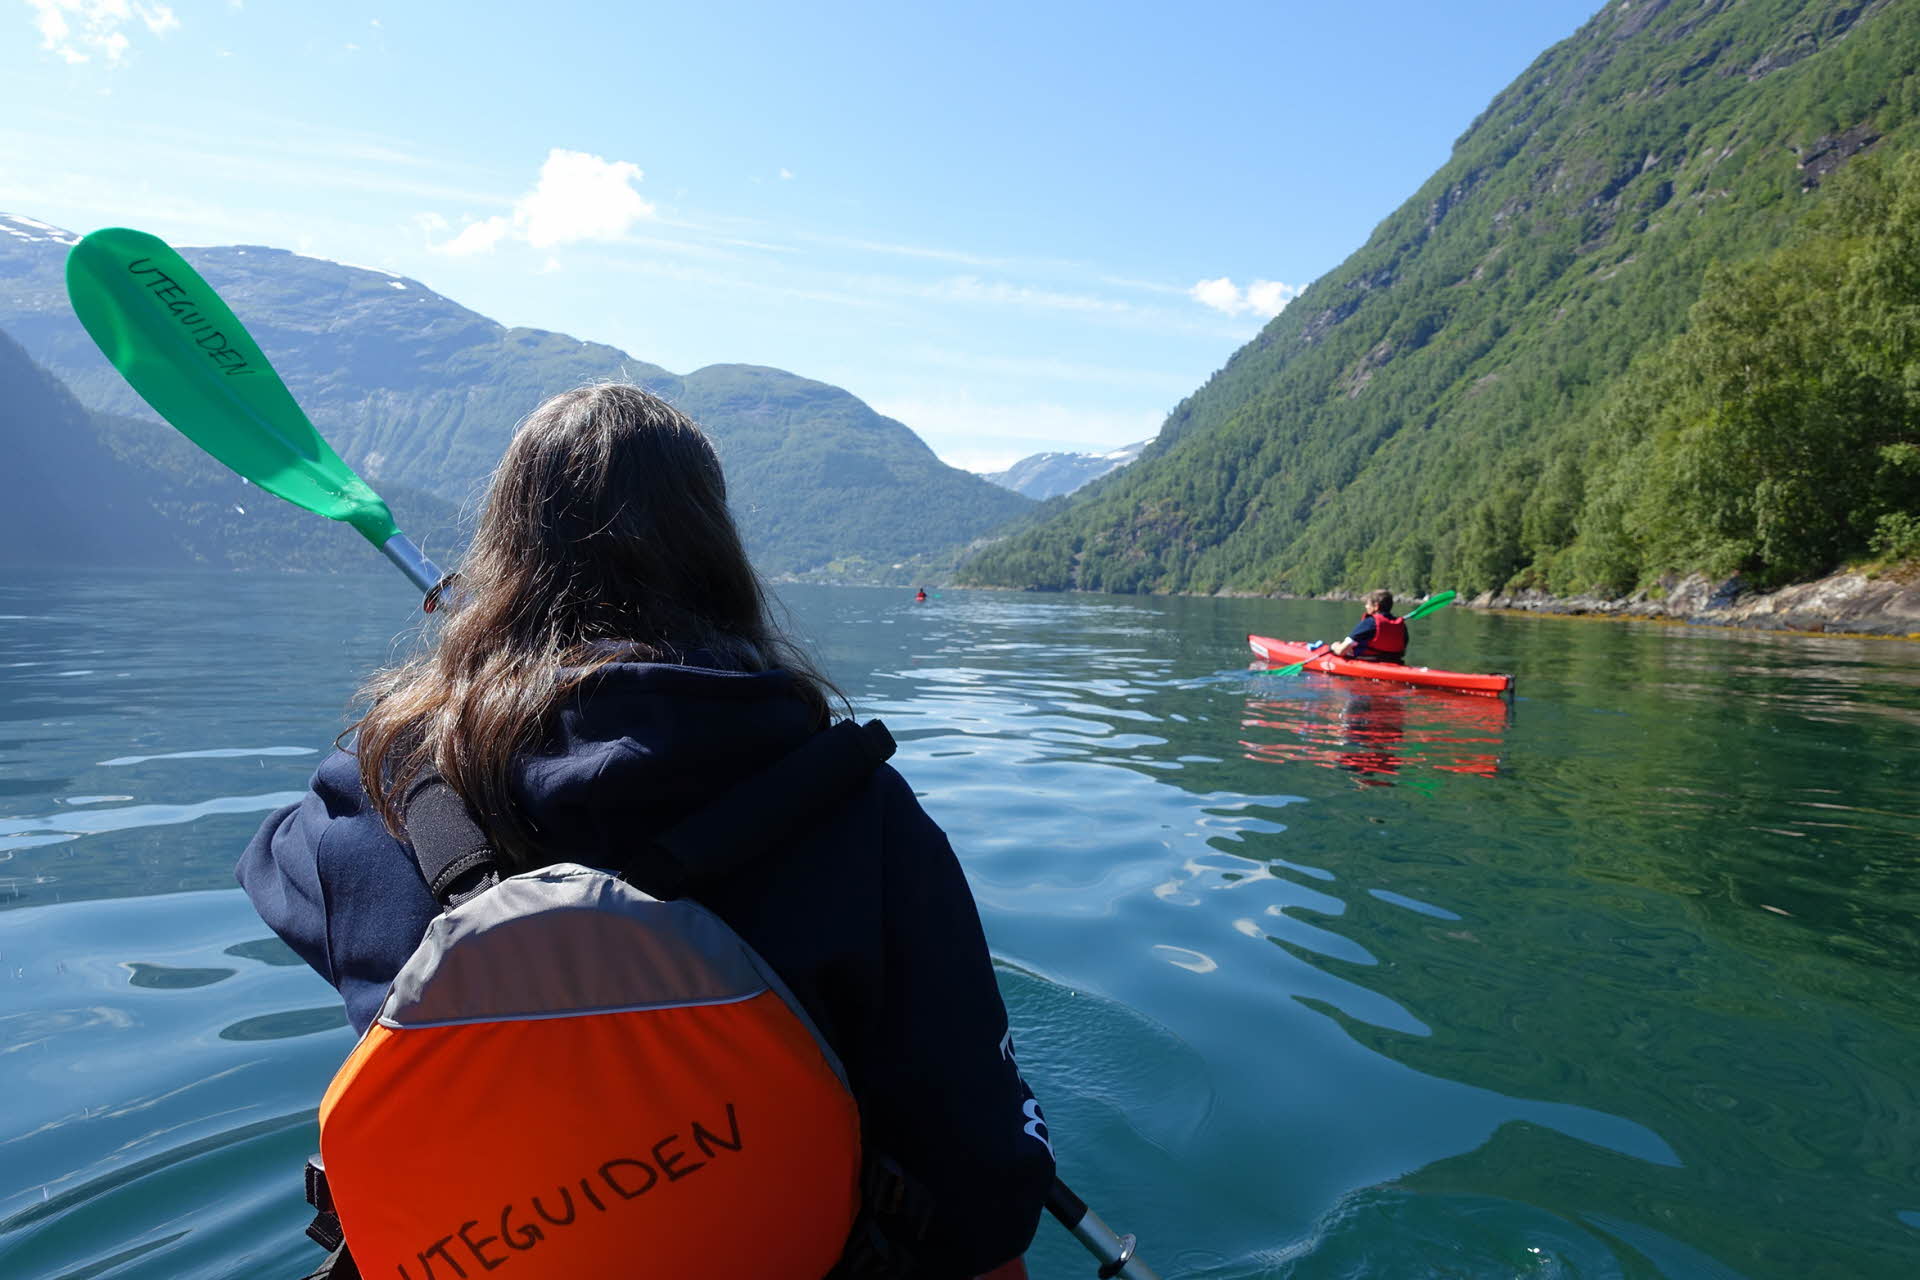 Woamn in red kayak with green paddles next to another paddler in Geirangerfjord